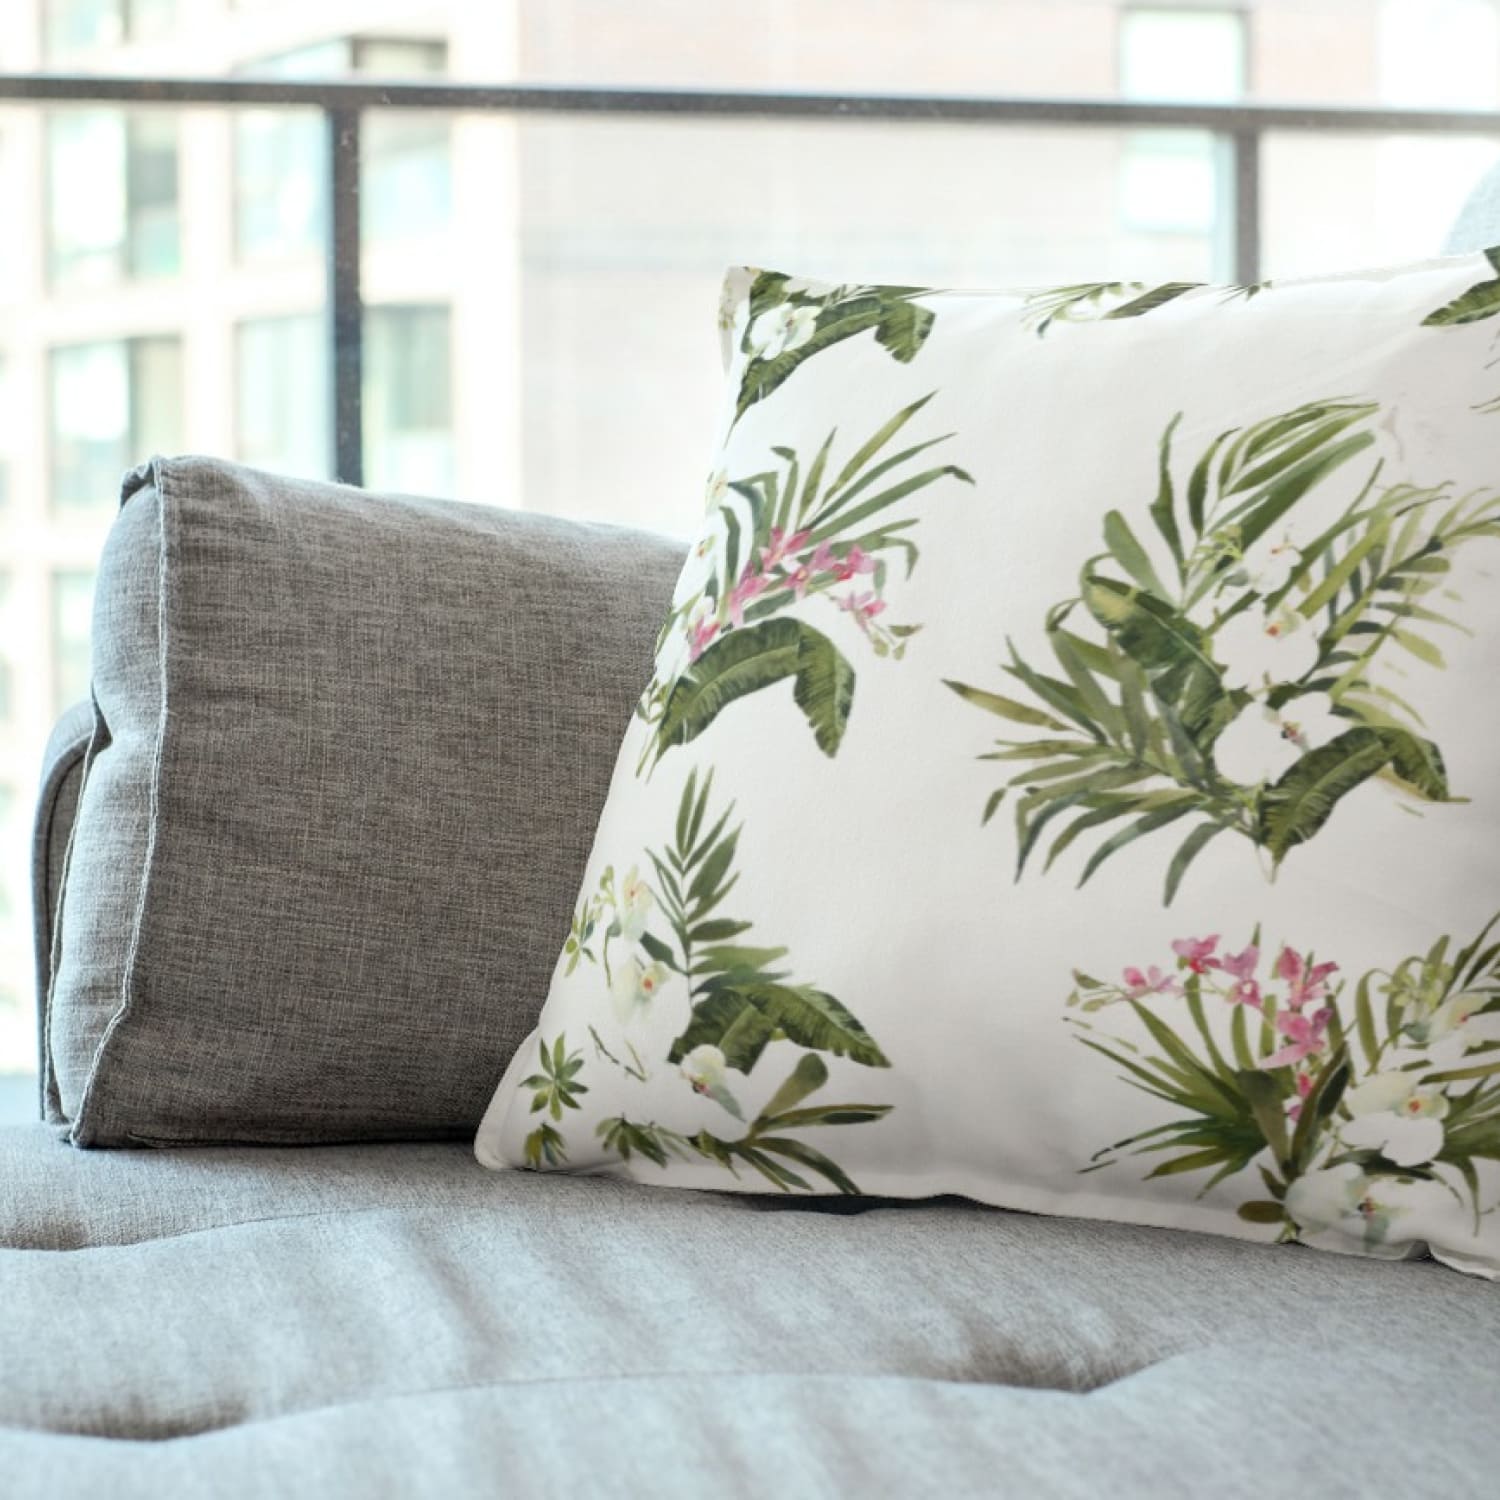 Pillow with white orchid tropic elements.